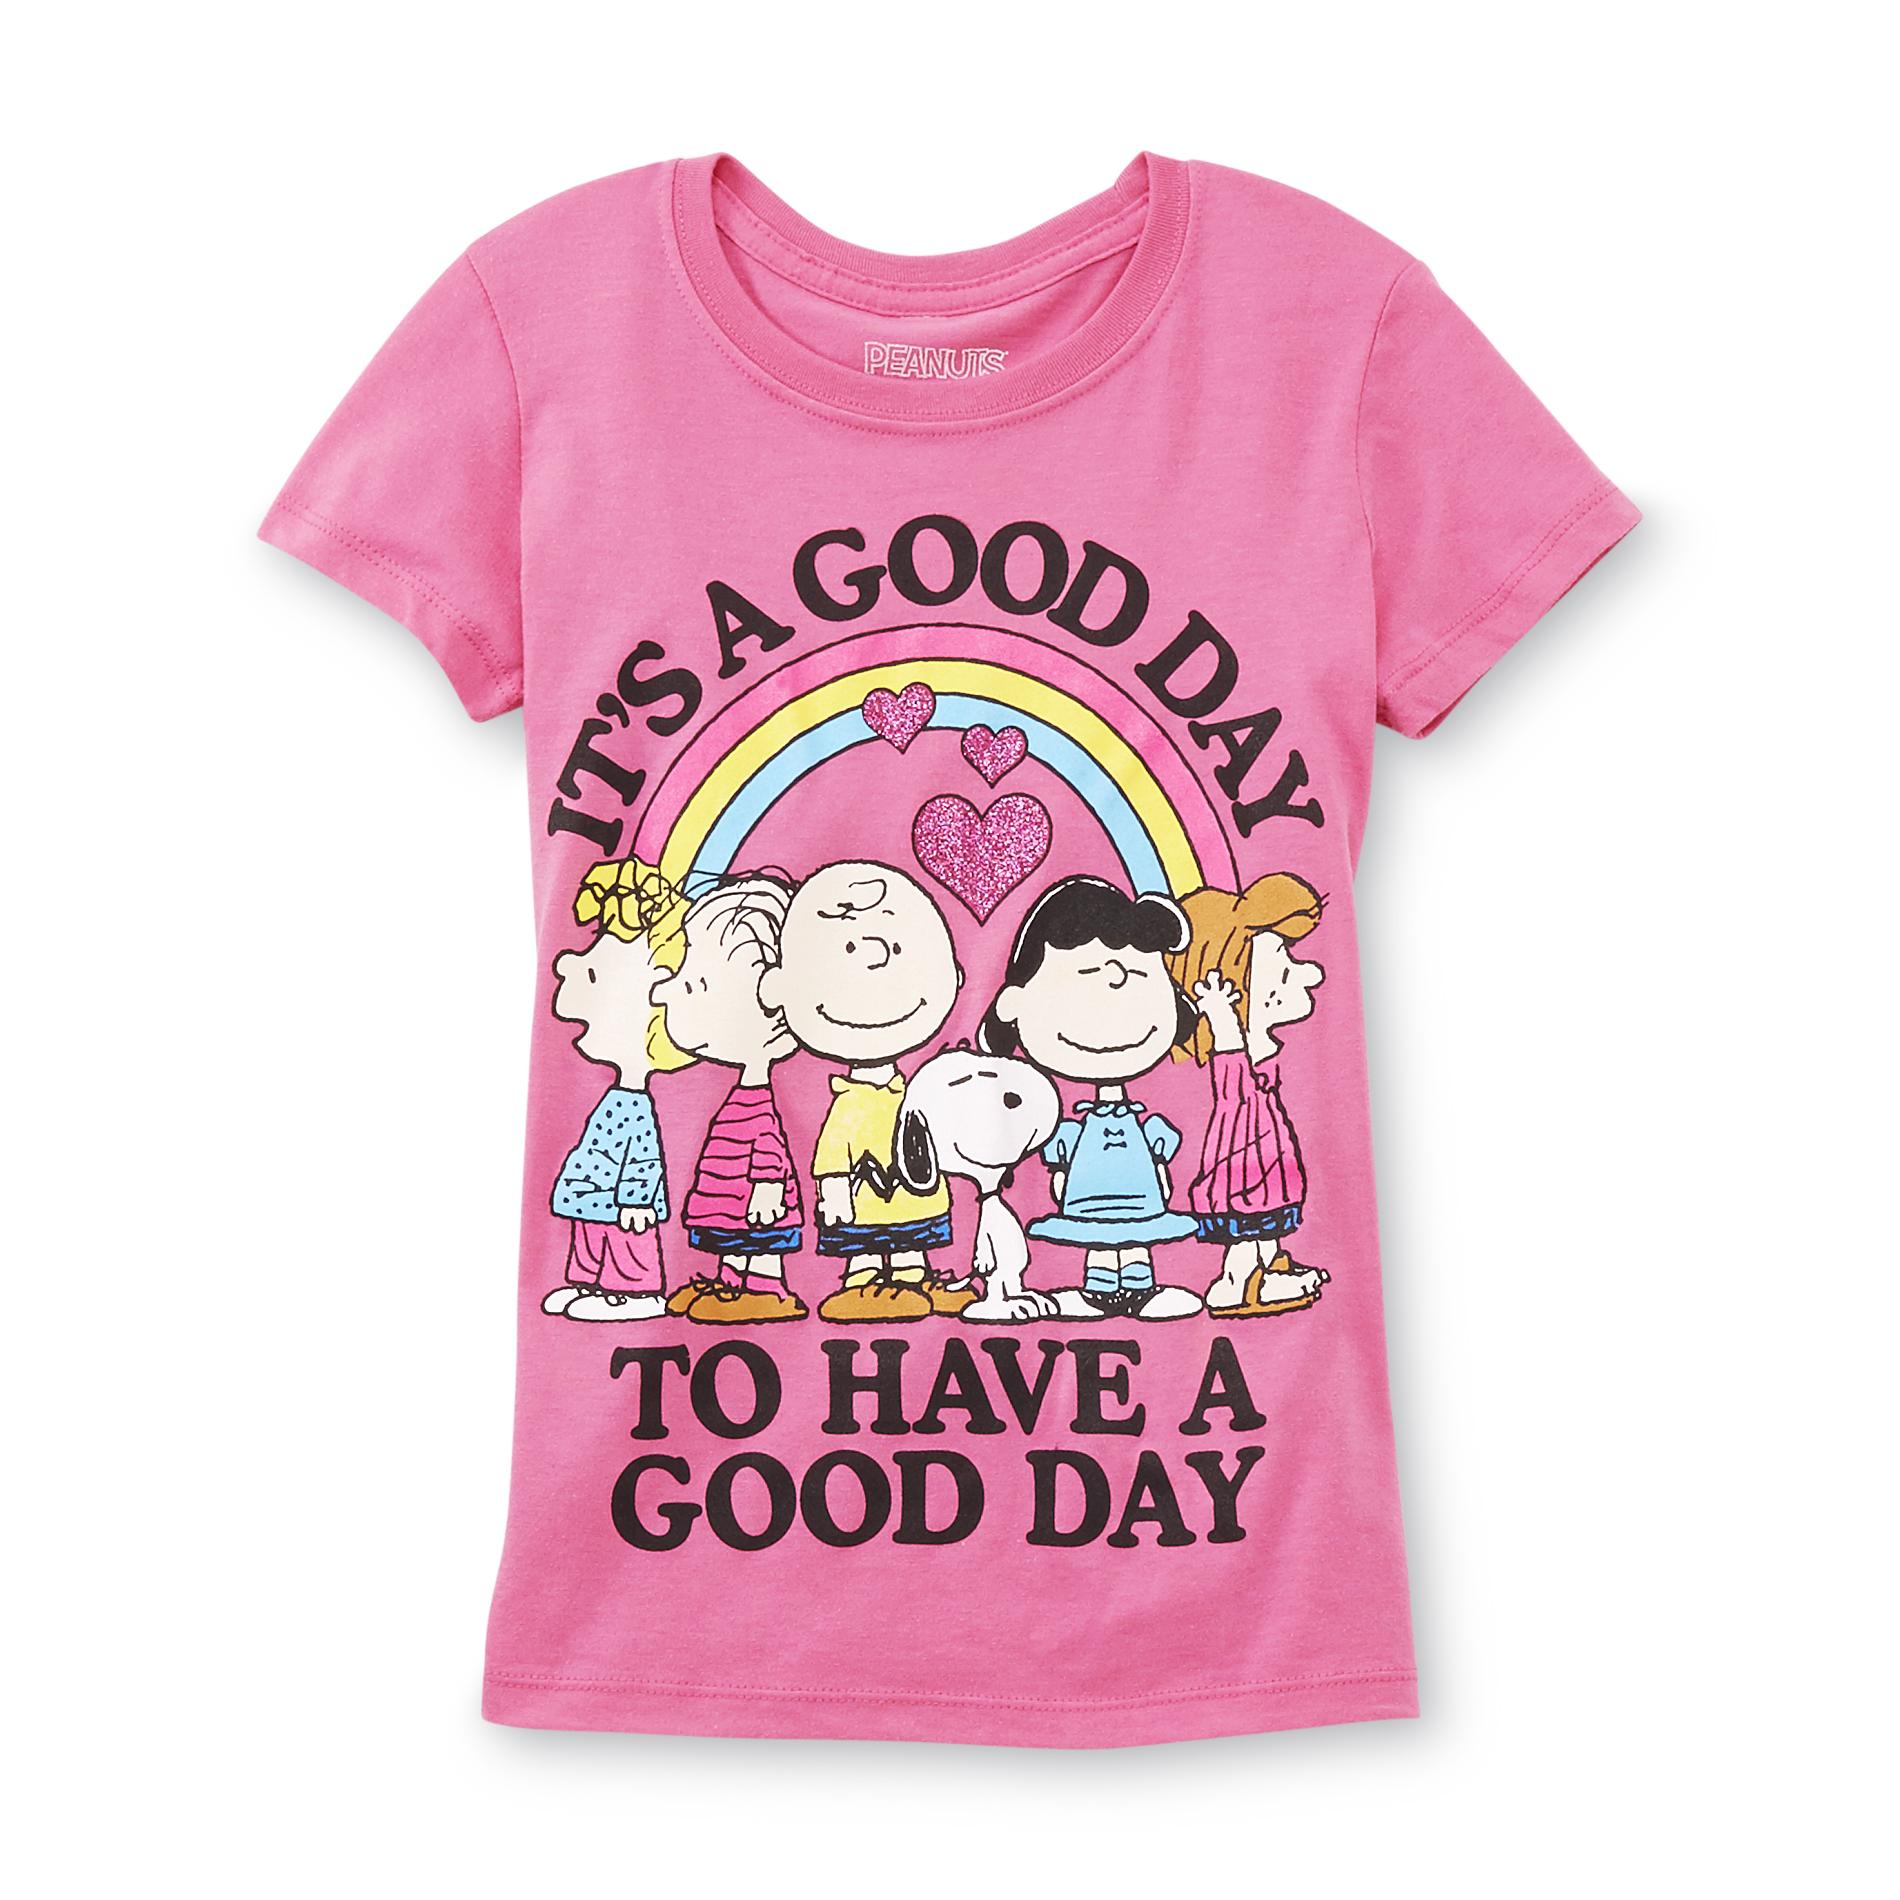 Peanuts By Schulz Girl's Graphic Top - Rainbow